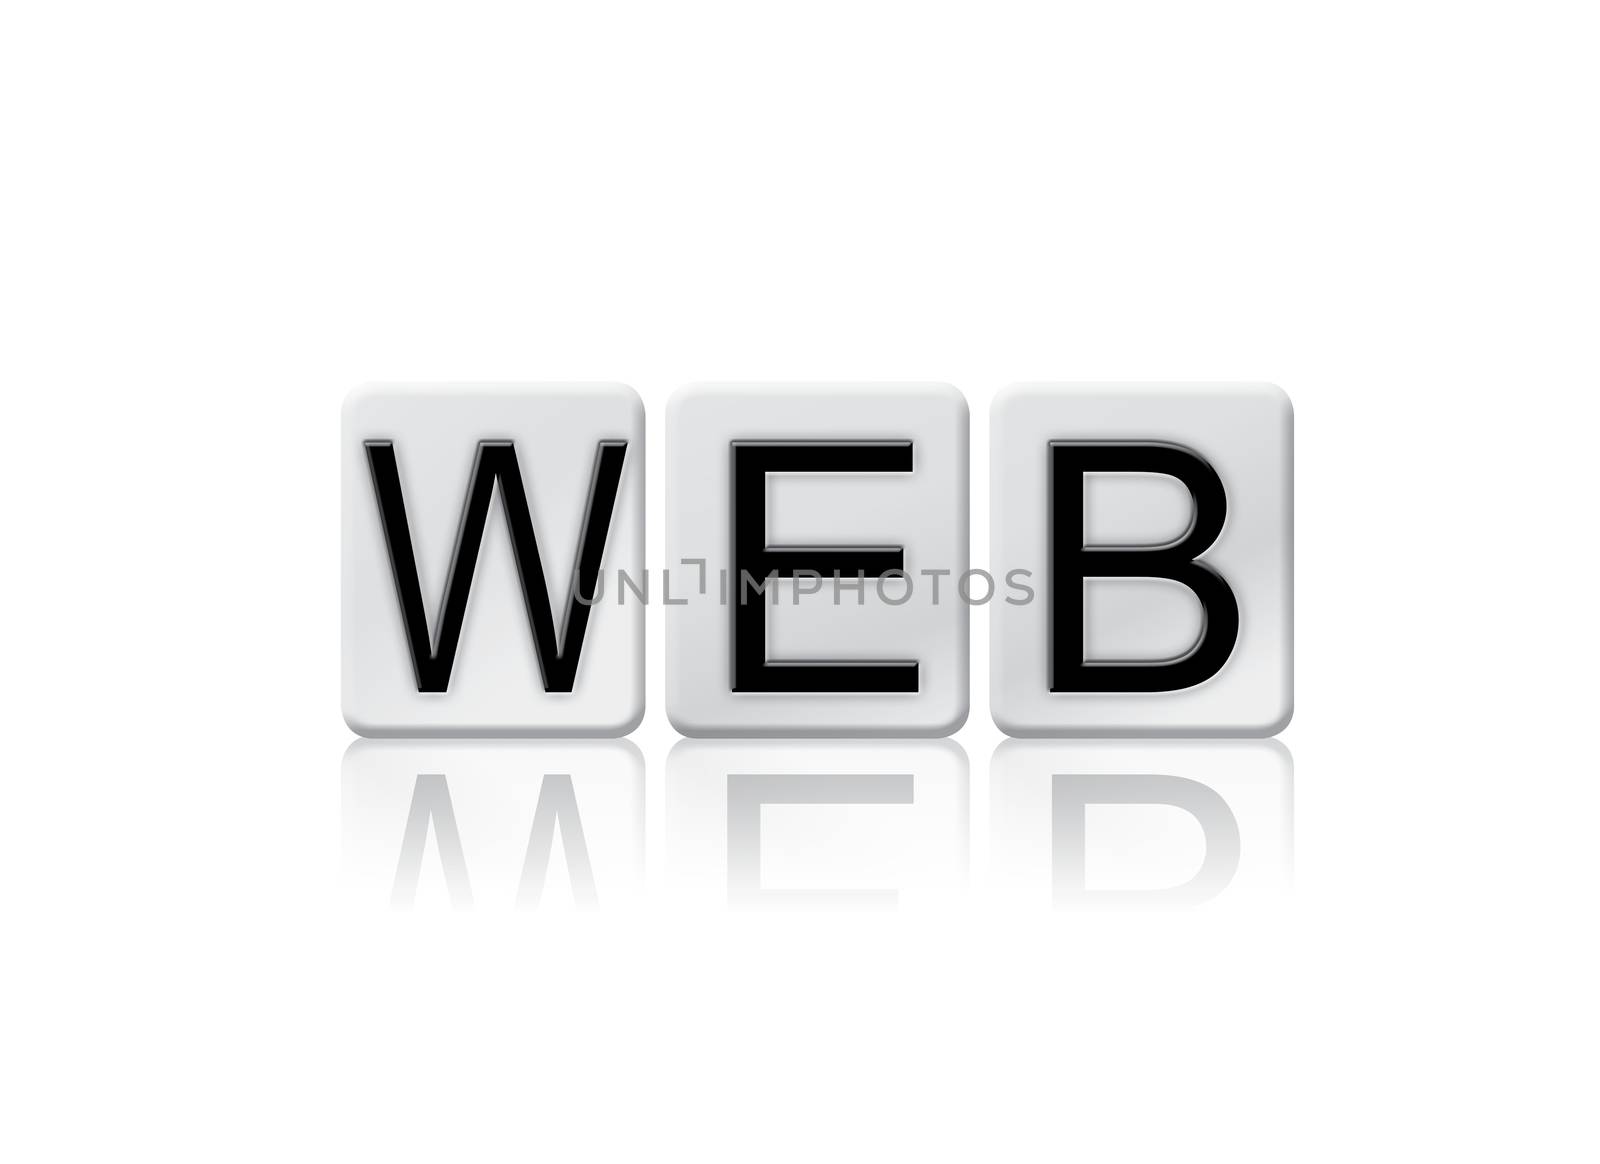 The word "Web" written in tile letters isolated on a white background.